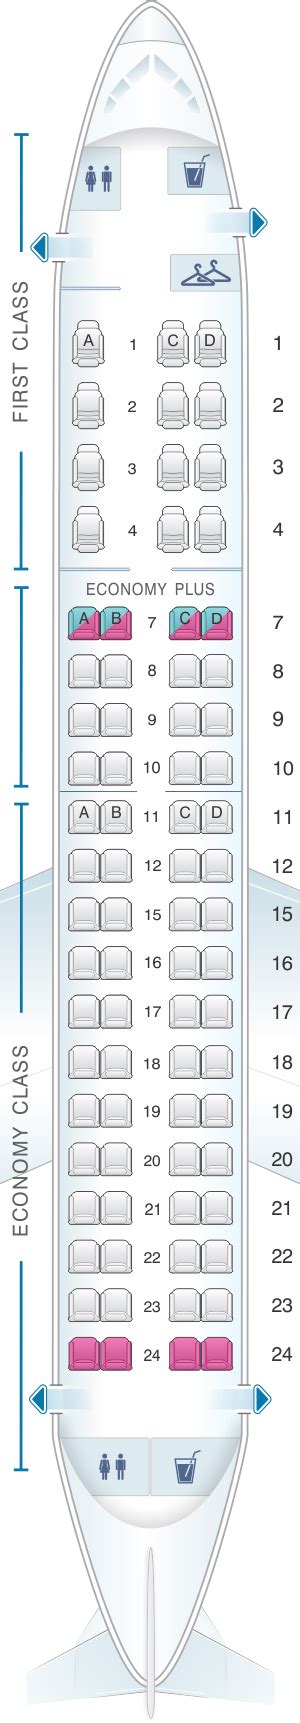 SeatGuru Seat Map United Airlines > United > Planes & Seat Maps > Embraer ERJ-145 (ERJ) United Seat Maps Do you know this plane? Seating details Seat map key …. 